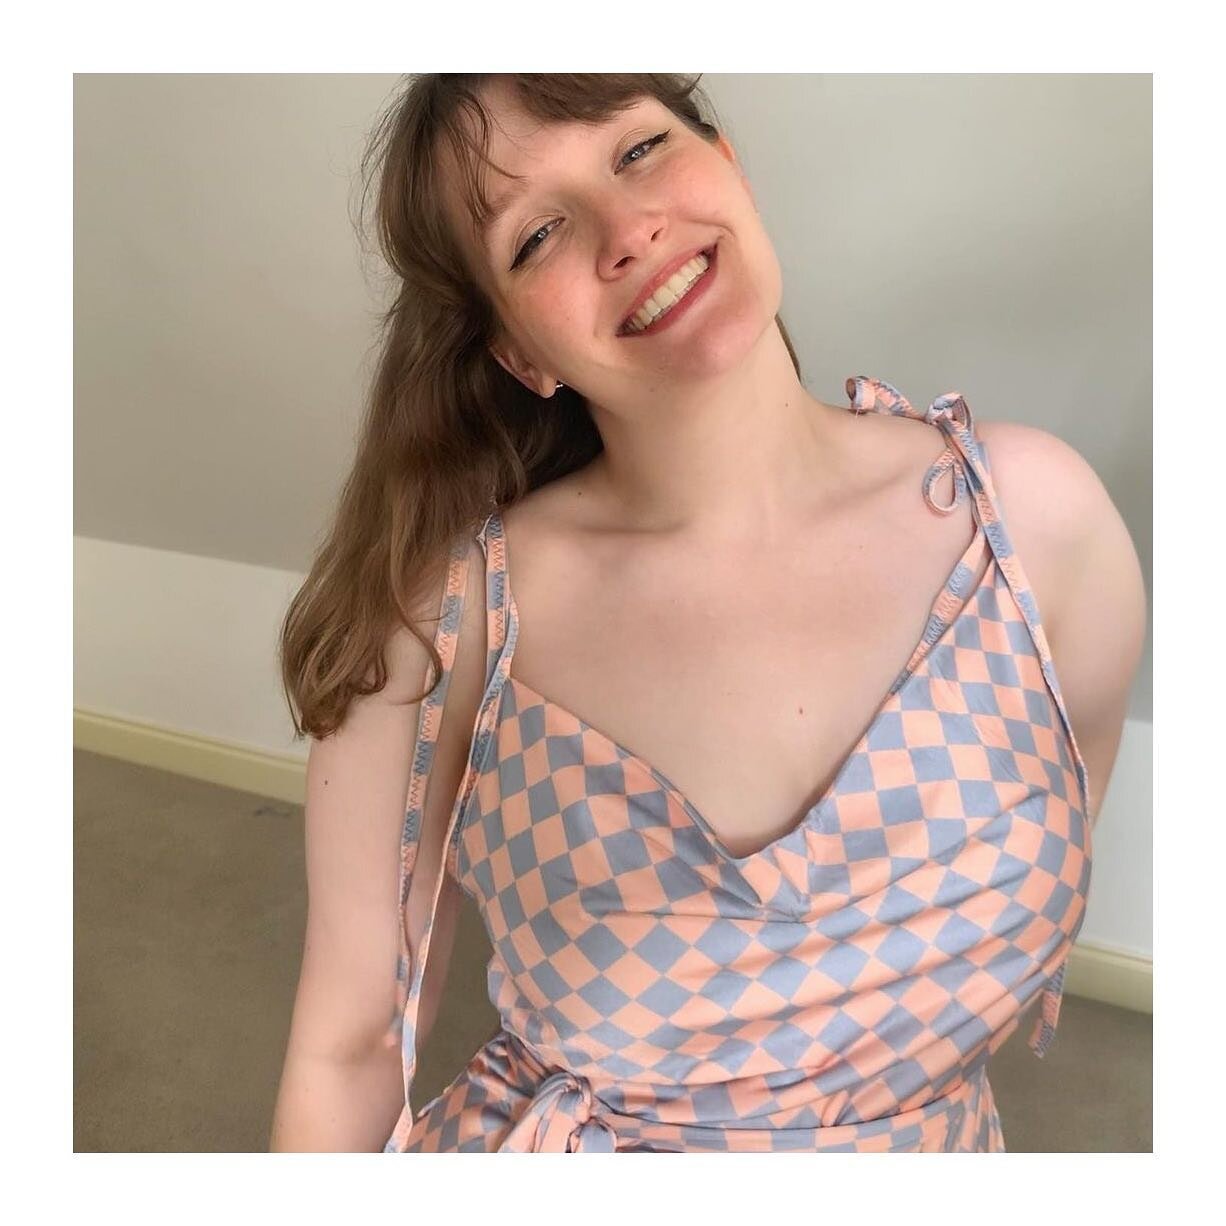 Oh hey there Insta, it&rsquo;s been a while but I&rsquo;m coming back strong with this little ray of sunshine 🌞 @rosiefranklindesign in her checky Deidre Dress 💕

#hubbadingpatterns #deidredress